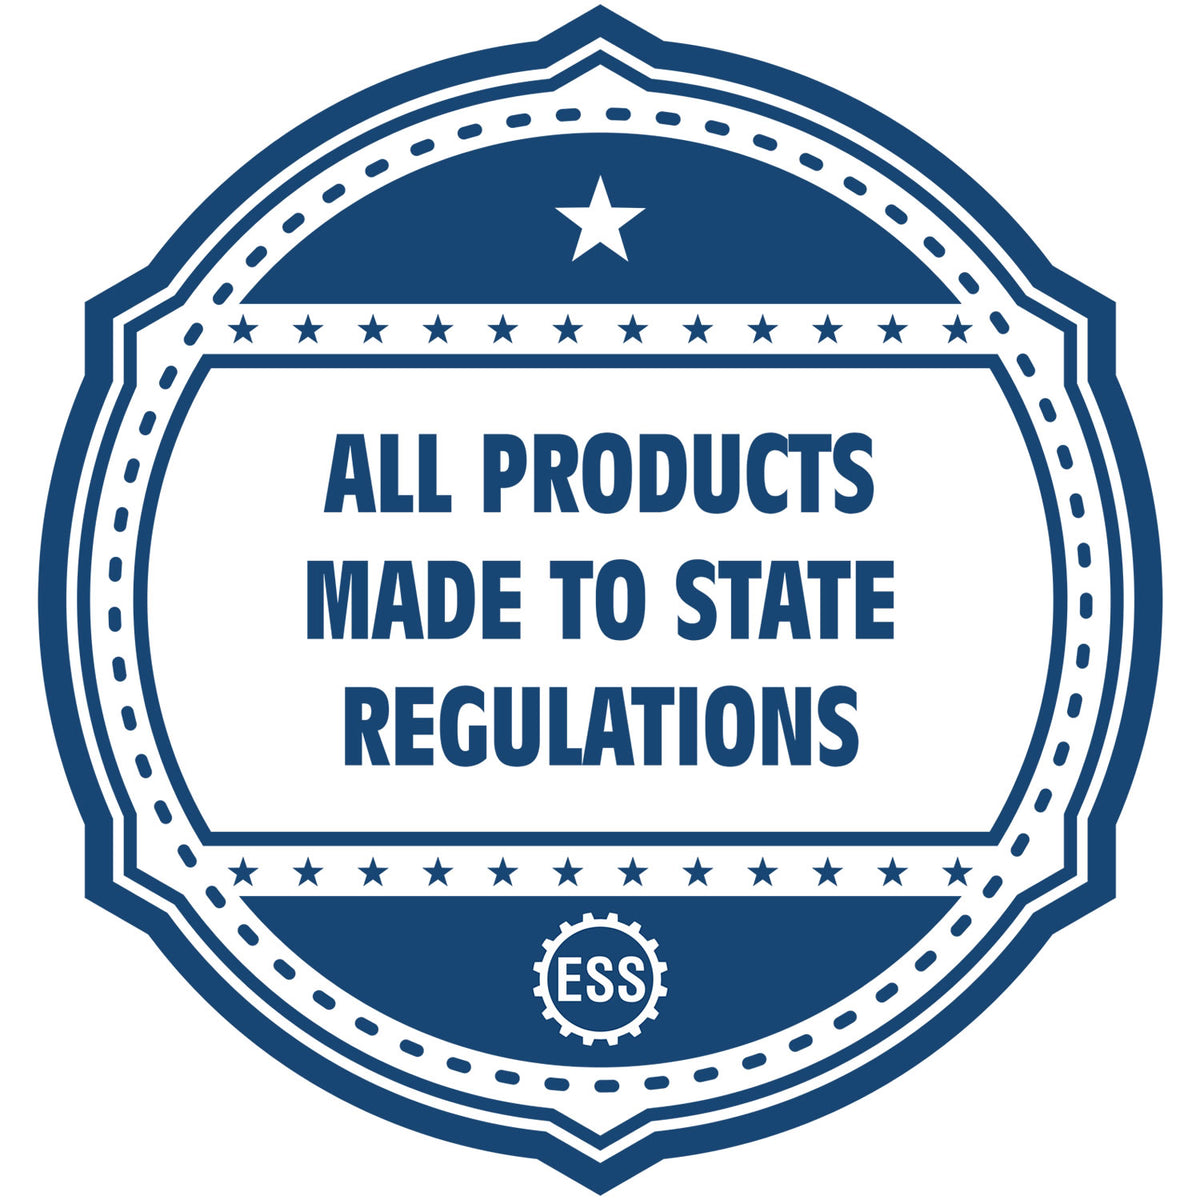 A blue icon or badge for the Hybrid Idaho Engineer Seal showing that this product is made in compliance with state regulations.